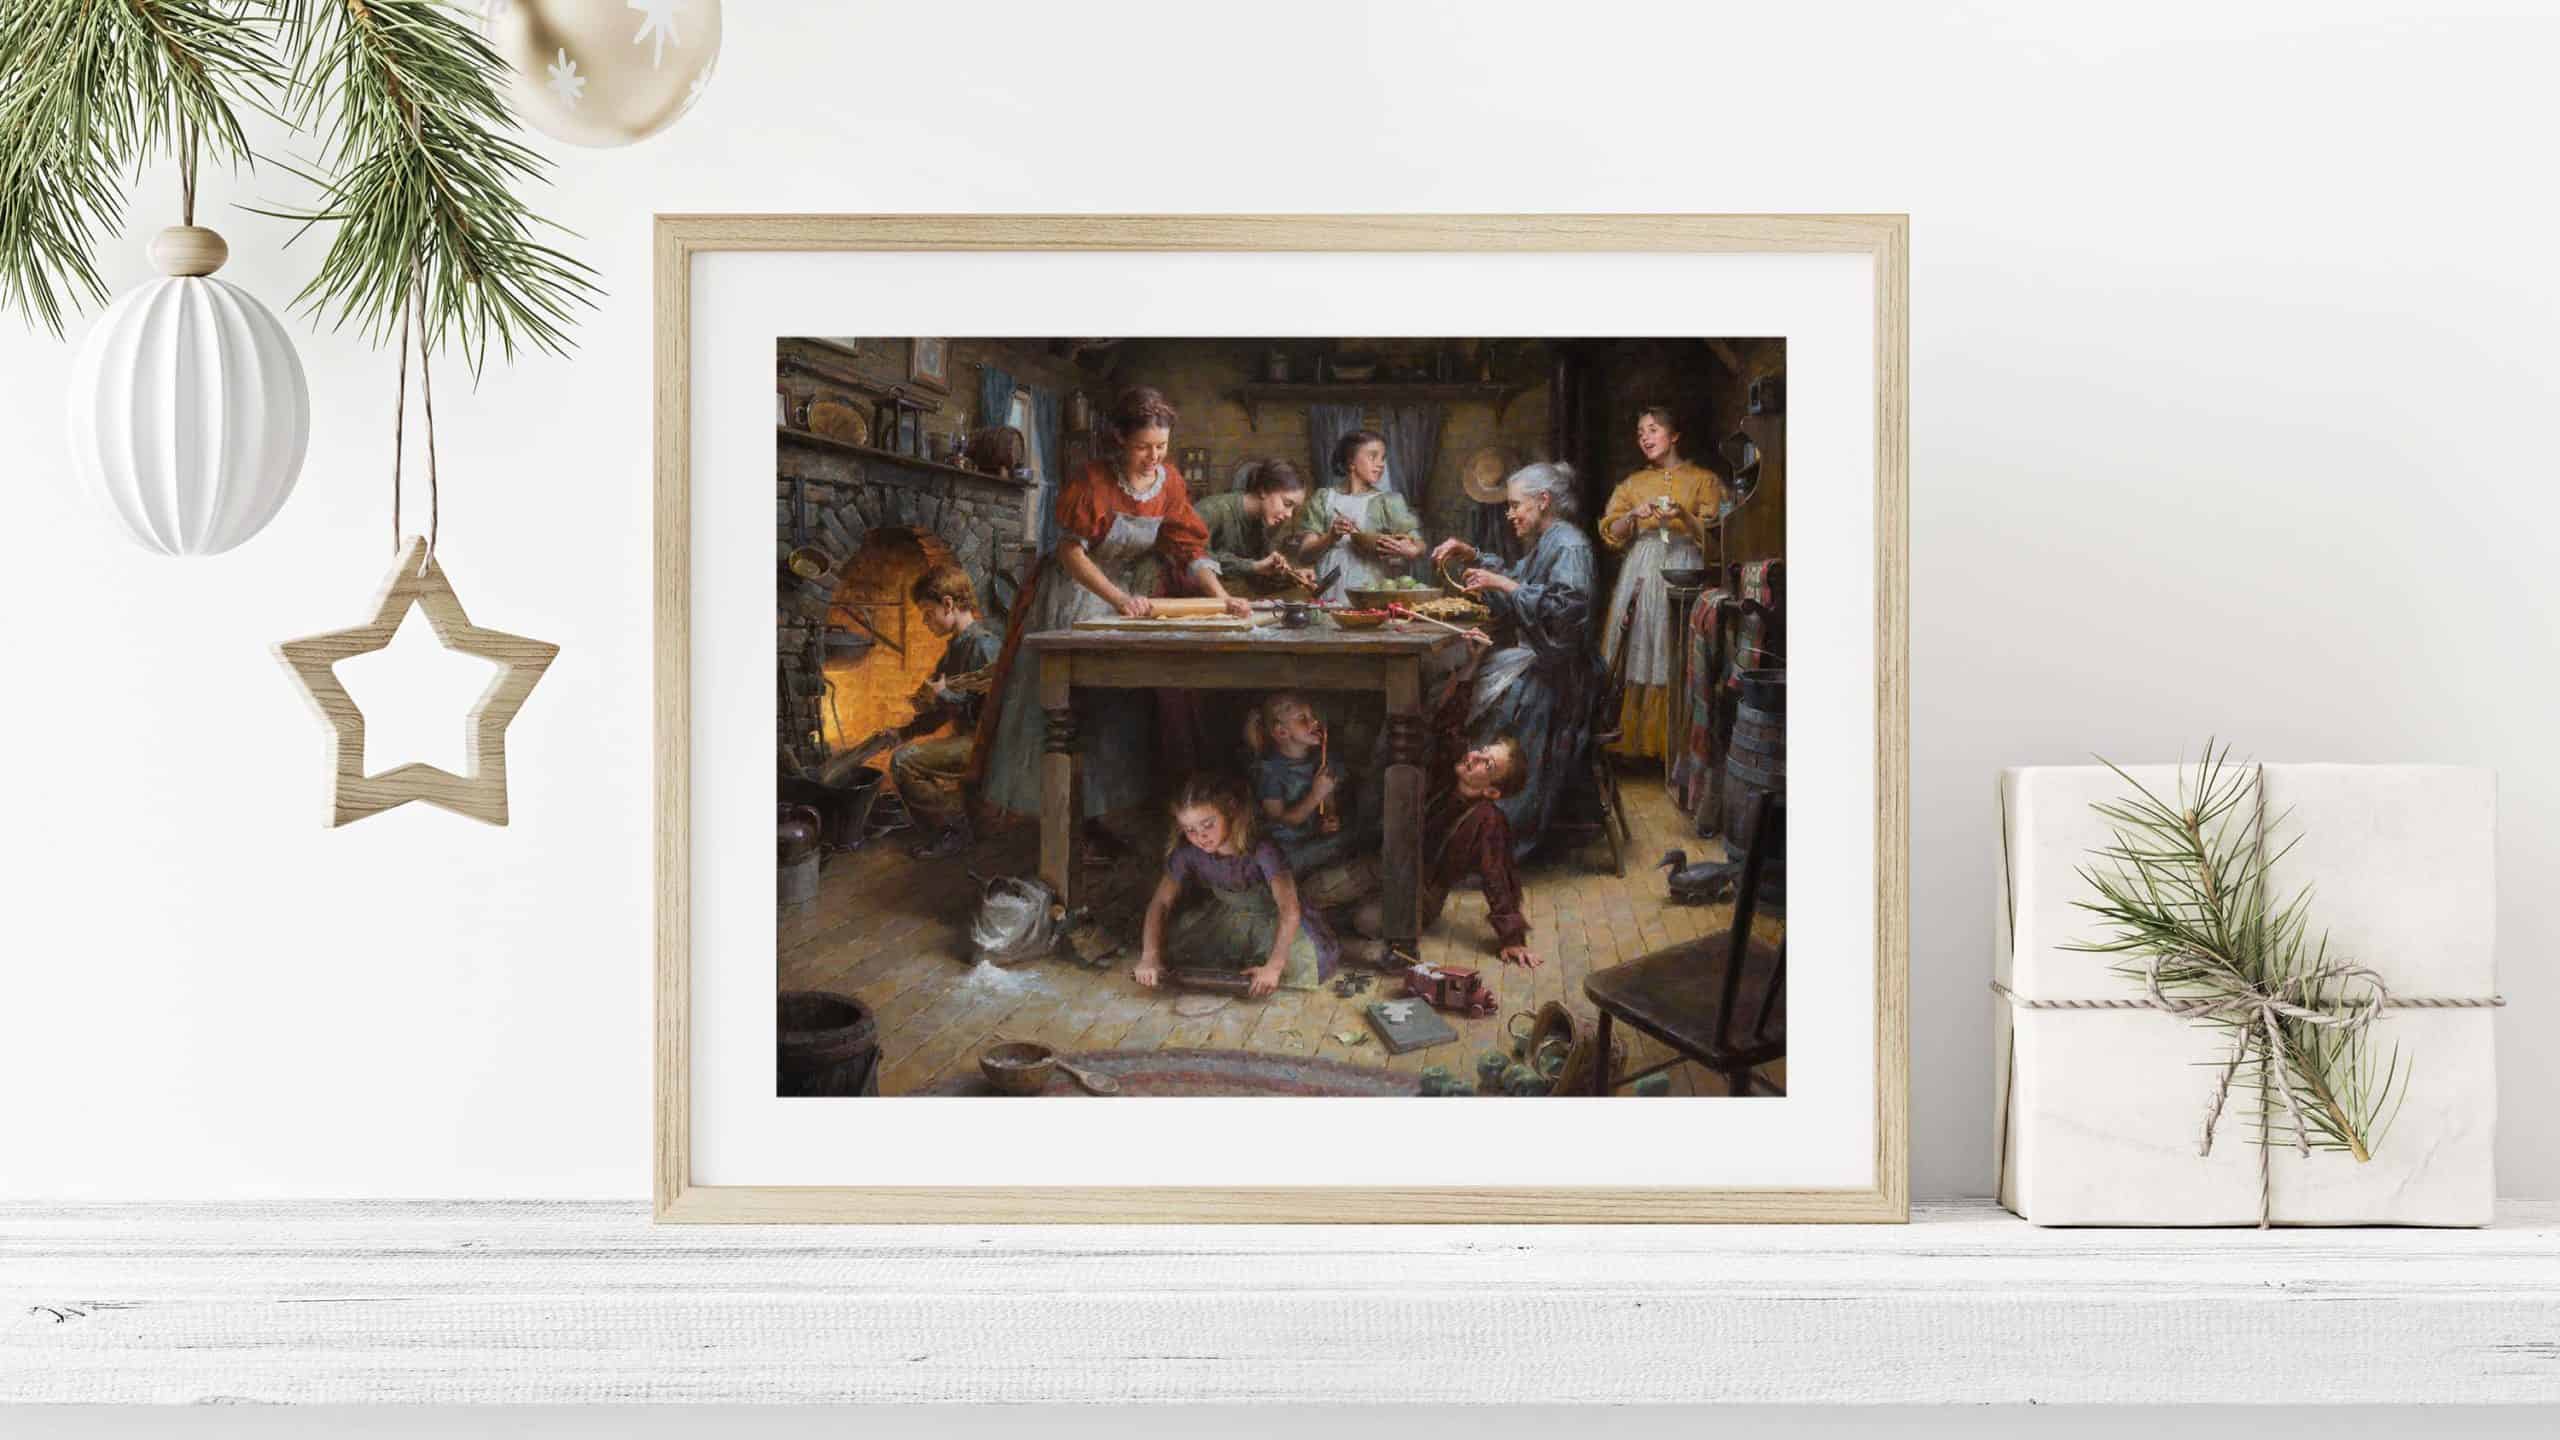 A Place at the Table - A fiction story related to Morgan Weistling's painting